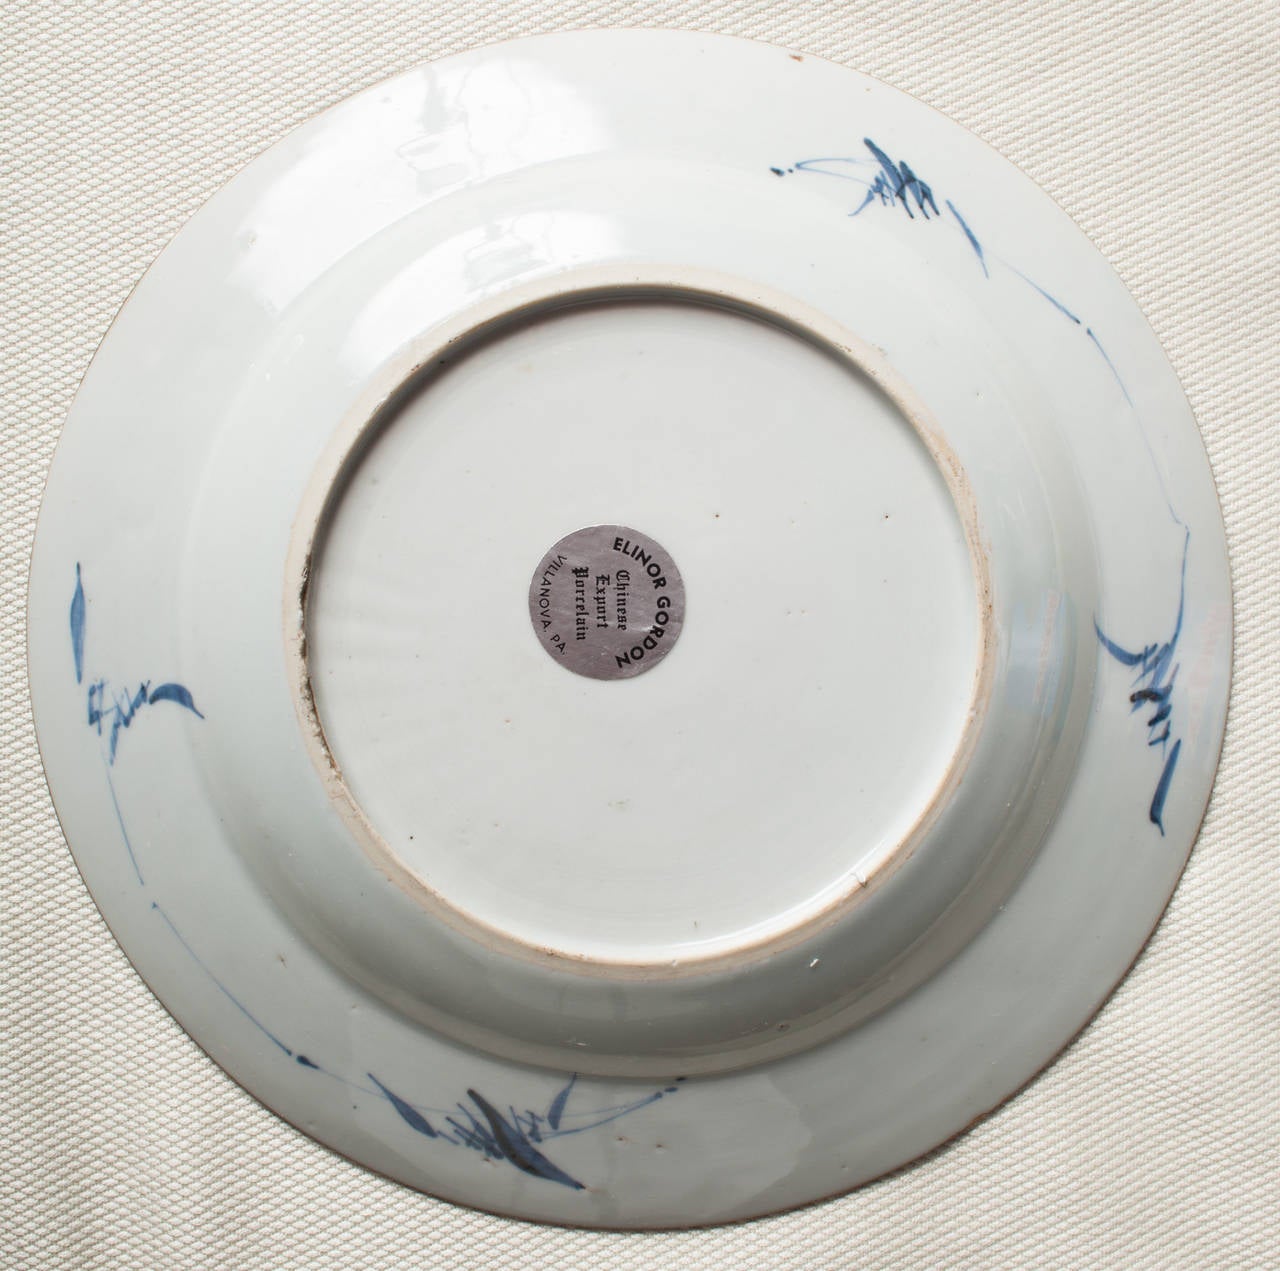 Chinese export porcelain plate in the Chinese Imari style of decoration. The plate is hand-painted in an underglaze blue and overpainted in iron red. The diameter is 9